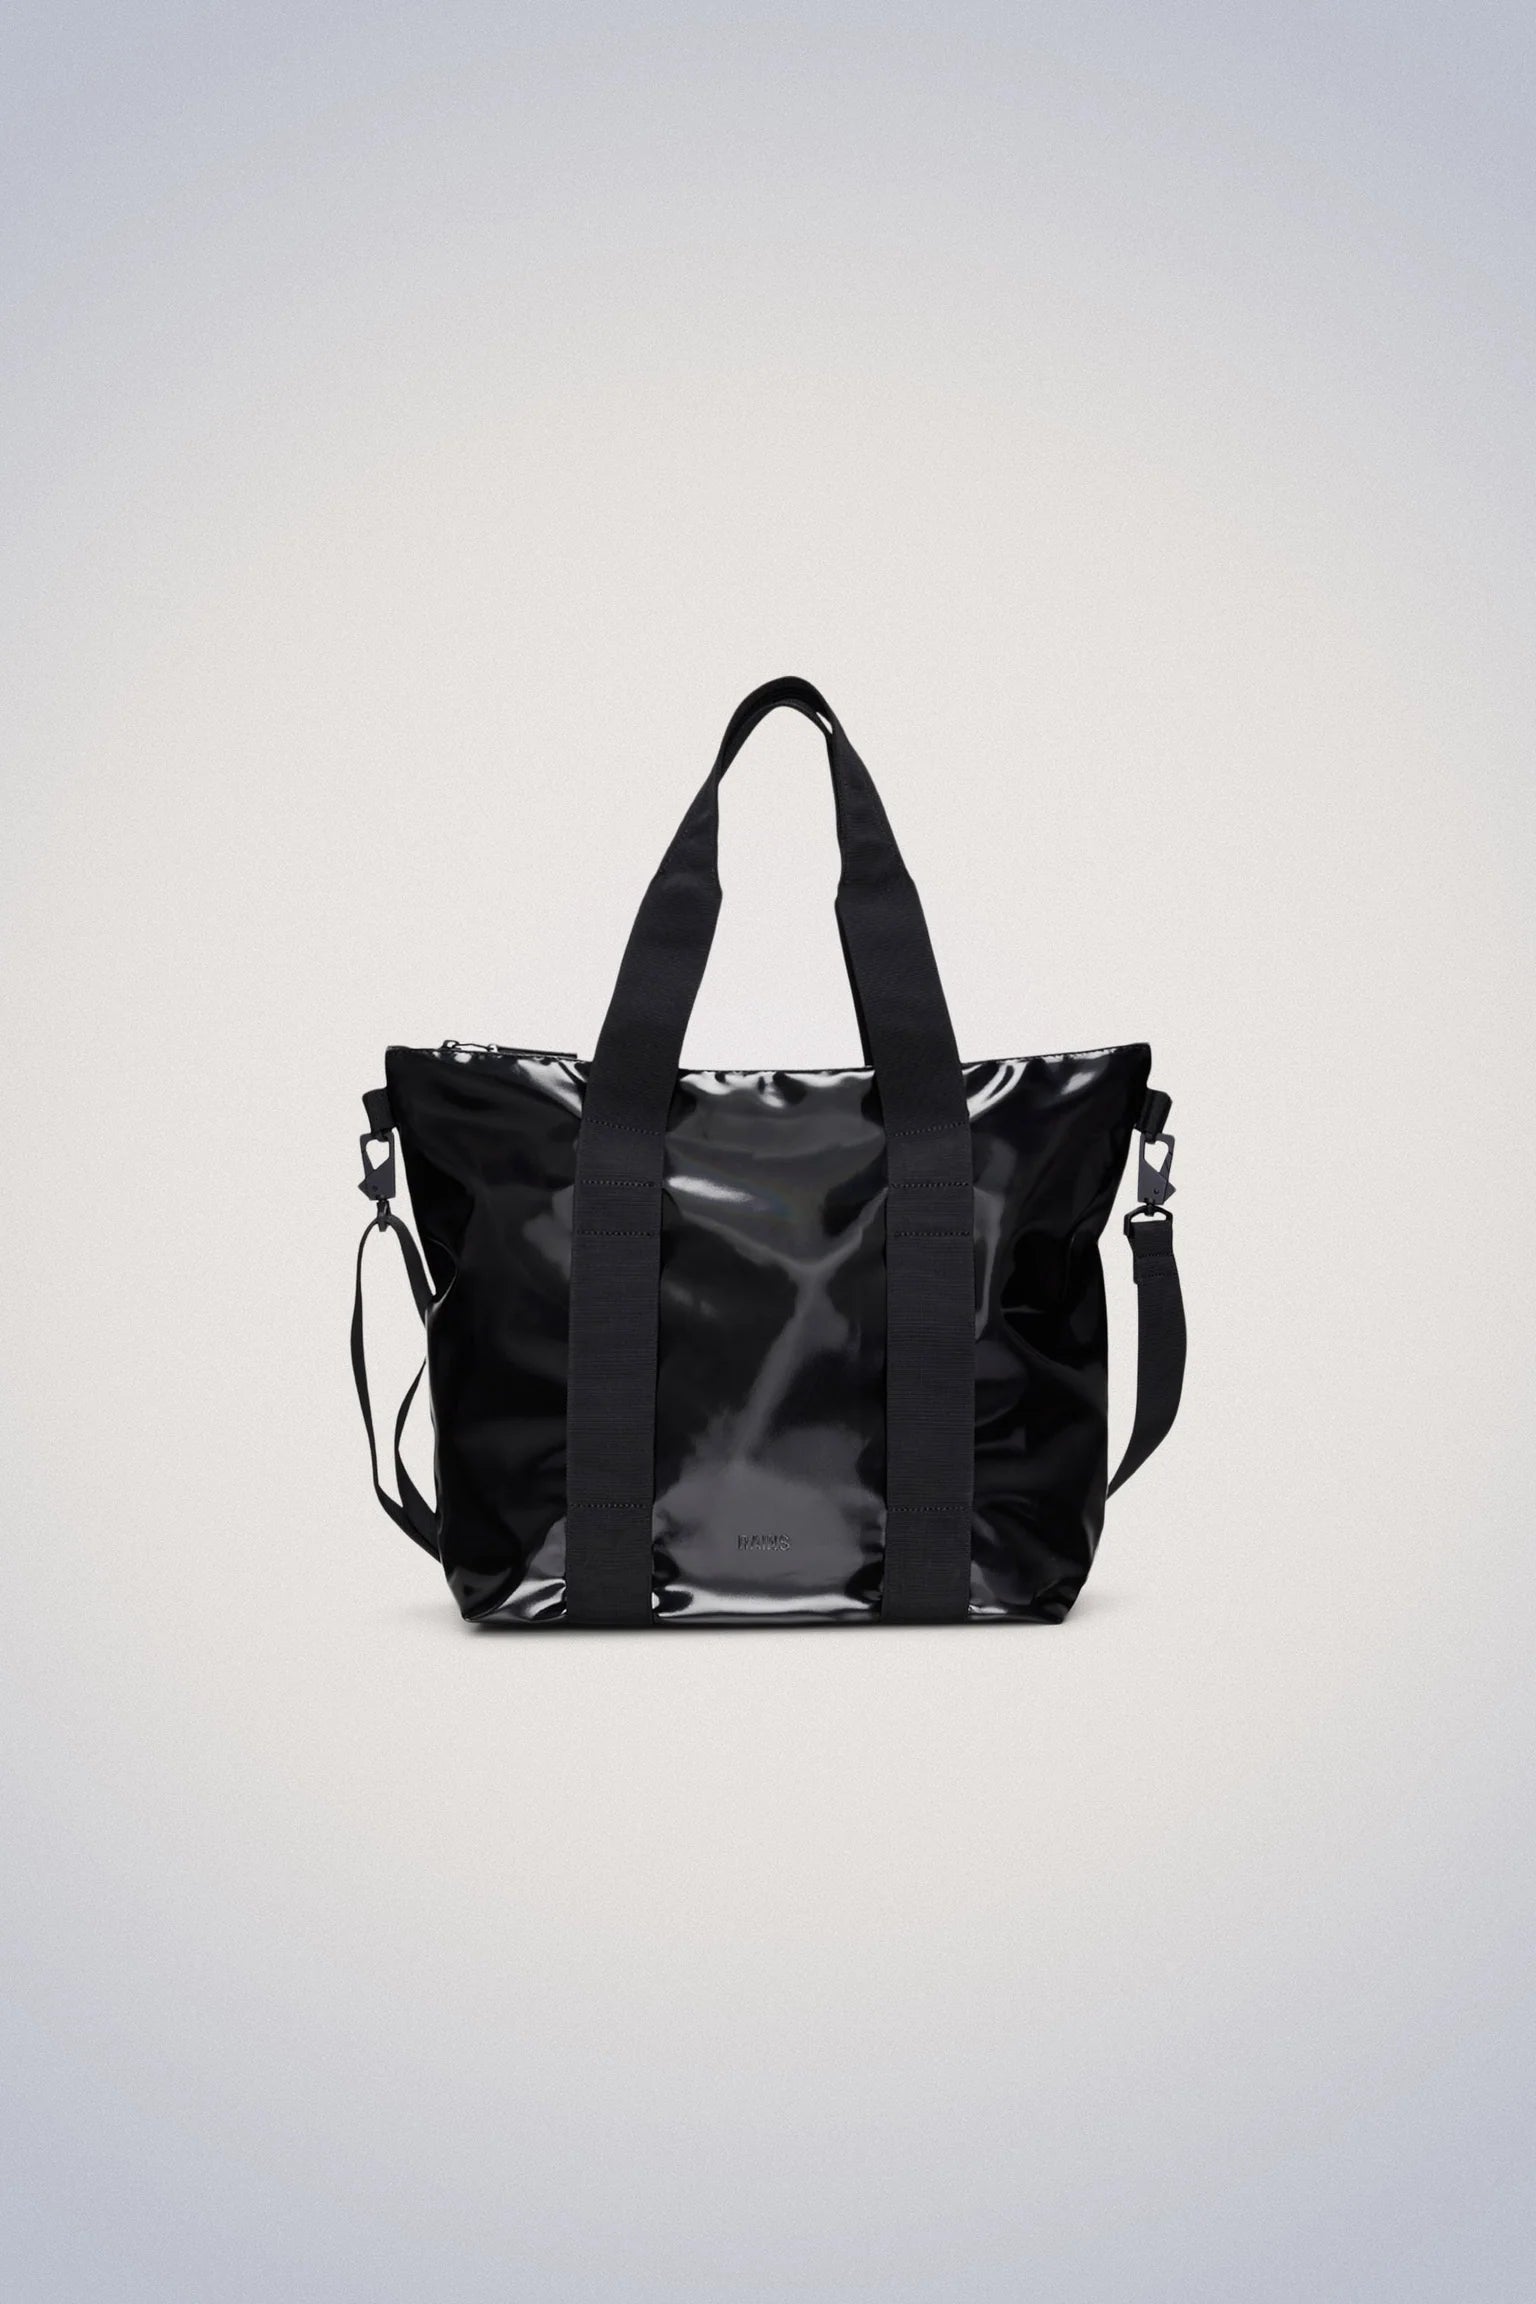 A Tote Bag Mini - Night by Rains on a white background, featuring a detachable strap and made from durable materials. The bag has reinforced stitching for added durability and interior pockets for plenty of storage space. Perfect.